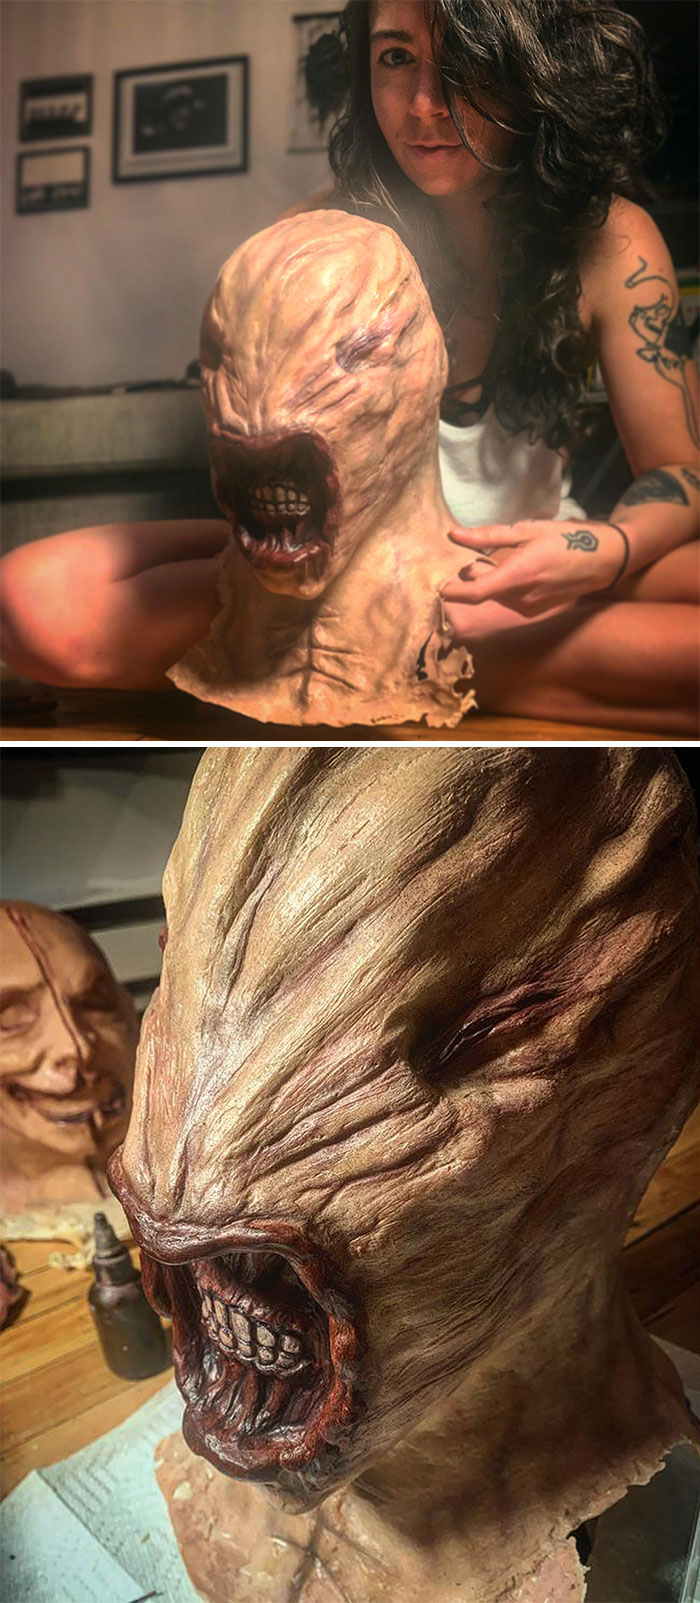 On My 3rd Round Of Detailing My New Chatterer Mask-Thought I Would Share The Progress So Far